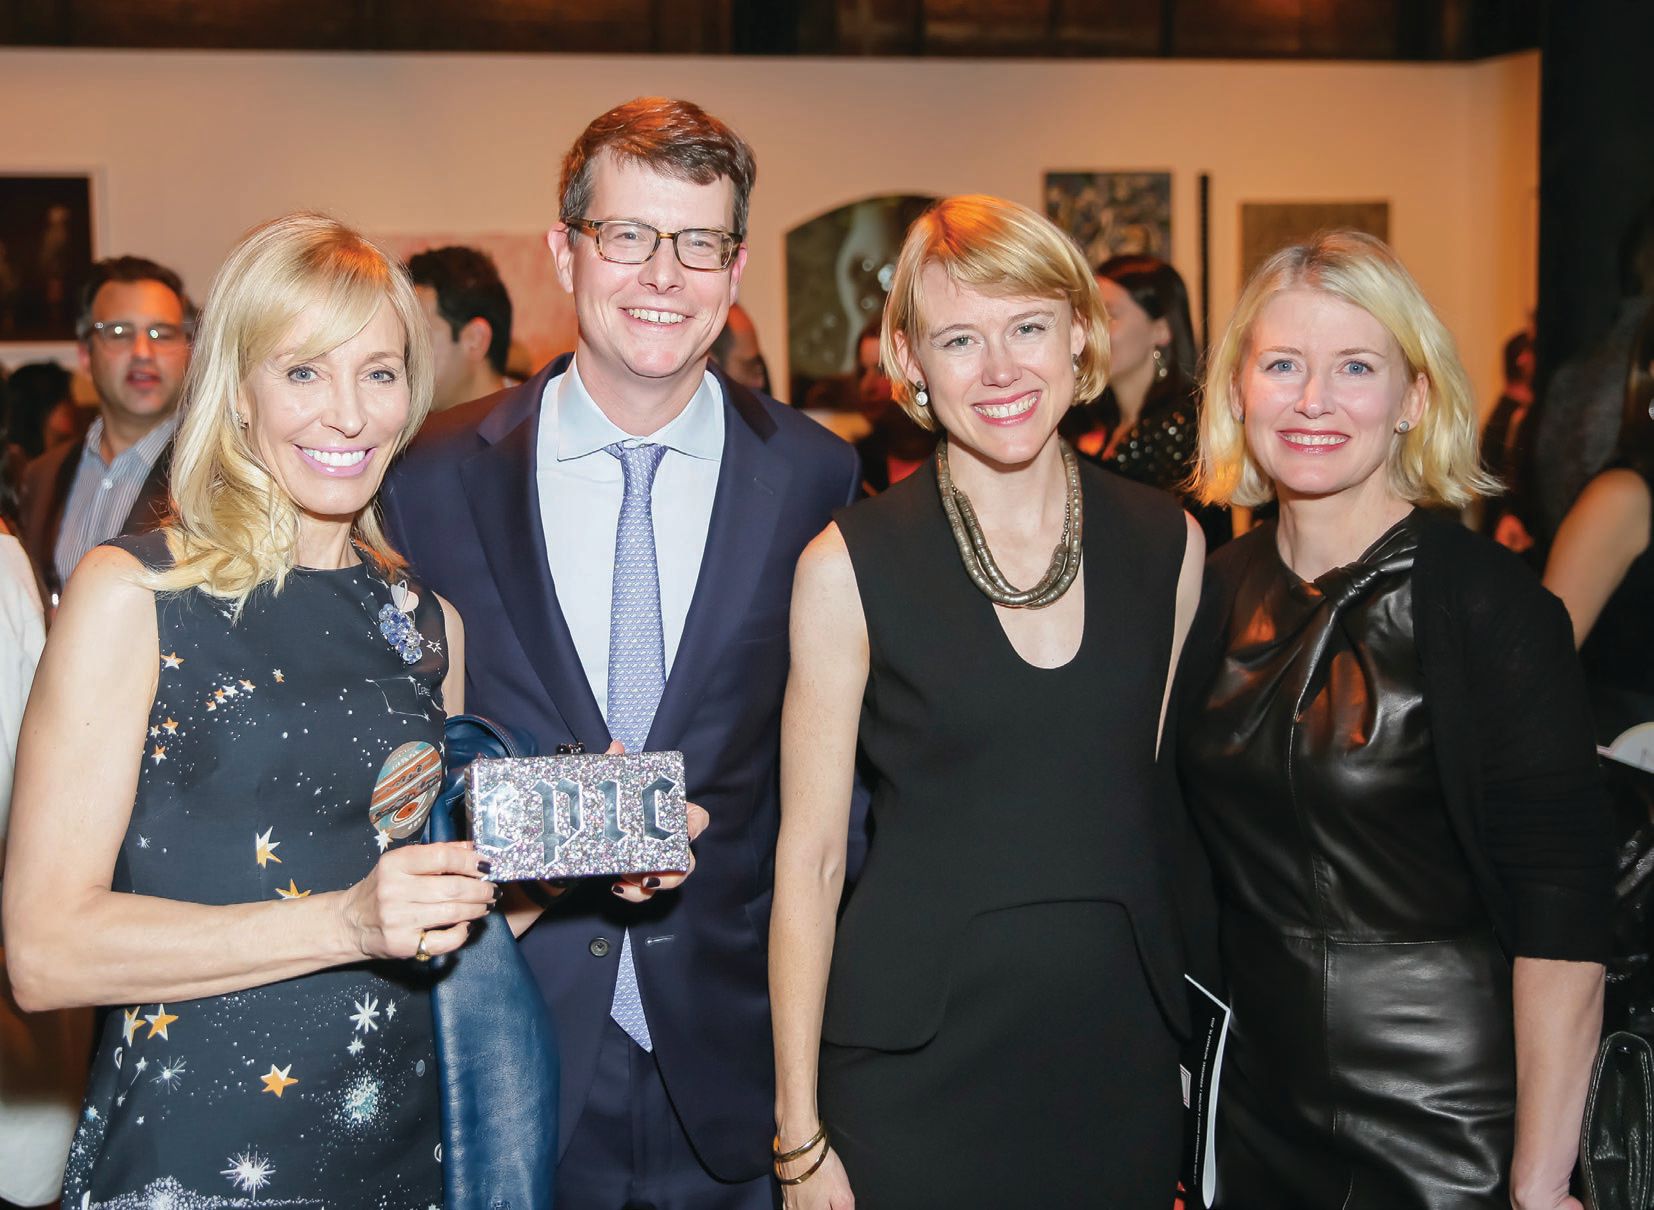 Suzette Bross (far right) with fellow philanthropist and artist Paula Crown (far left) and Jack and Dolly Geary PHOTO BY MAX LAKNER/BFA.COM